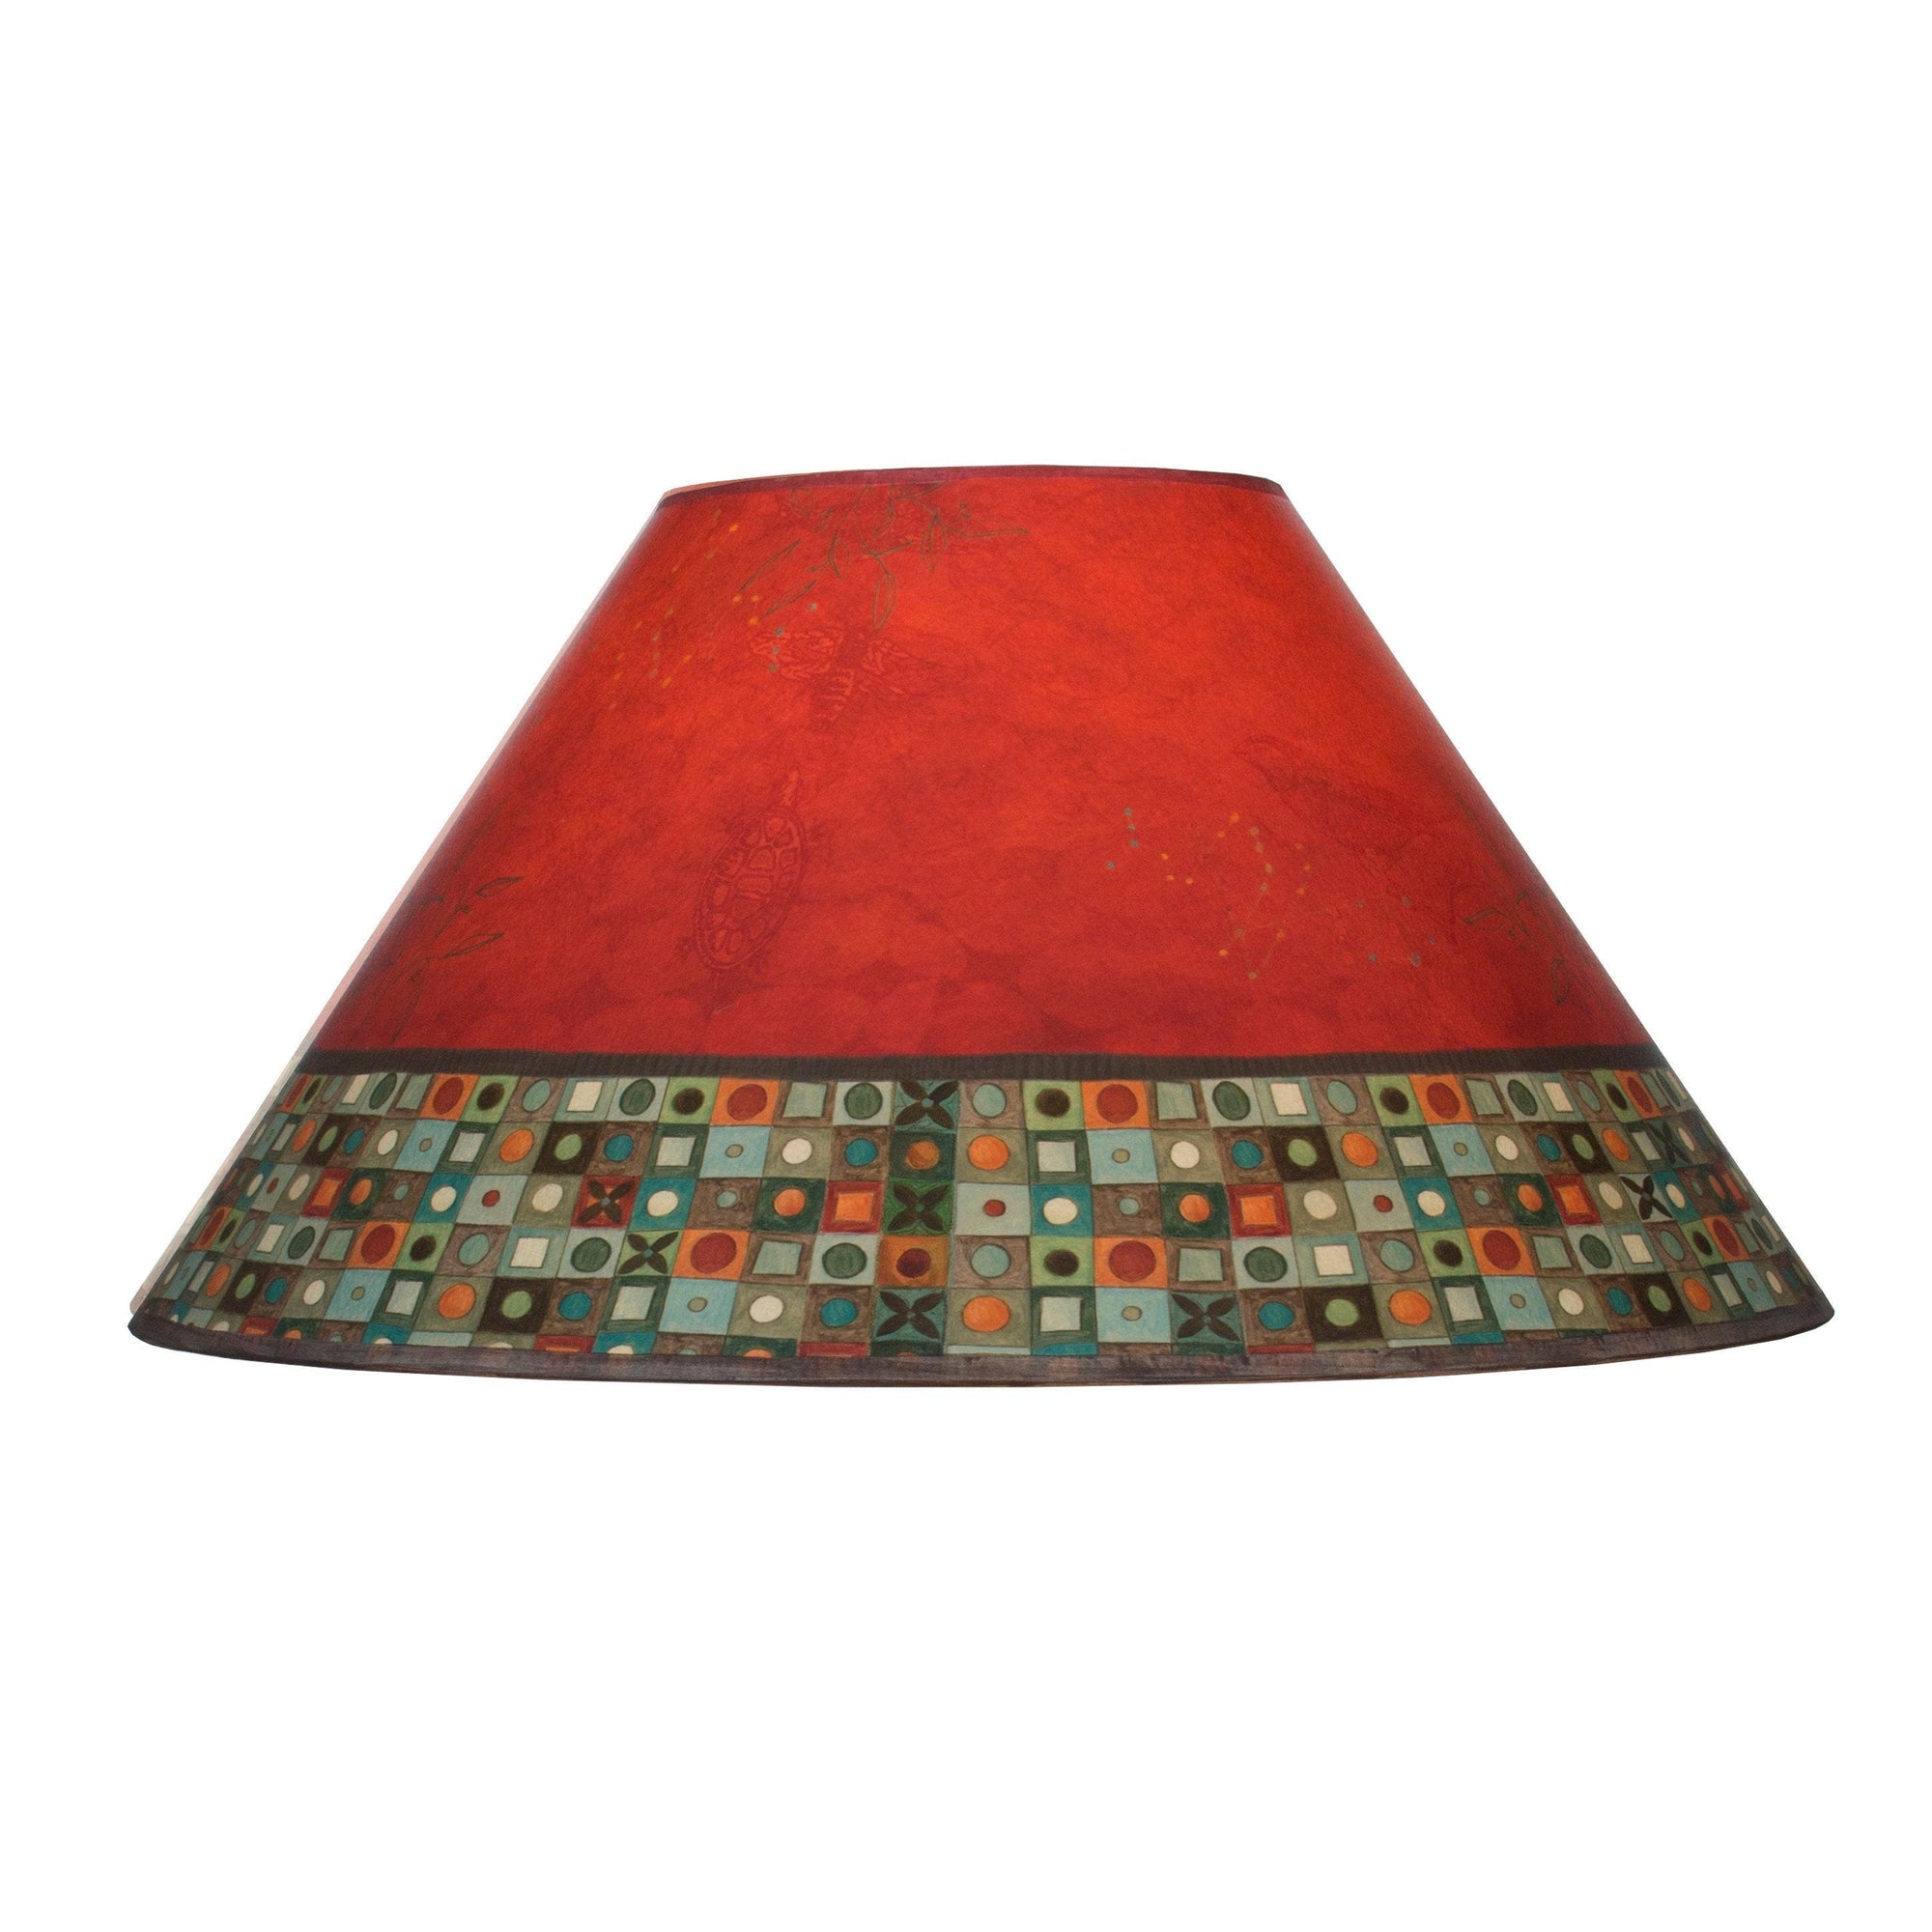 Janna Ugone & Co Lamp Shades Large Conical Lamp Shade in Red Mosaic